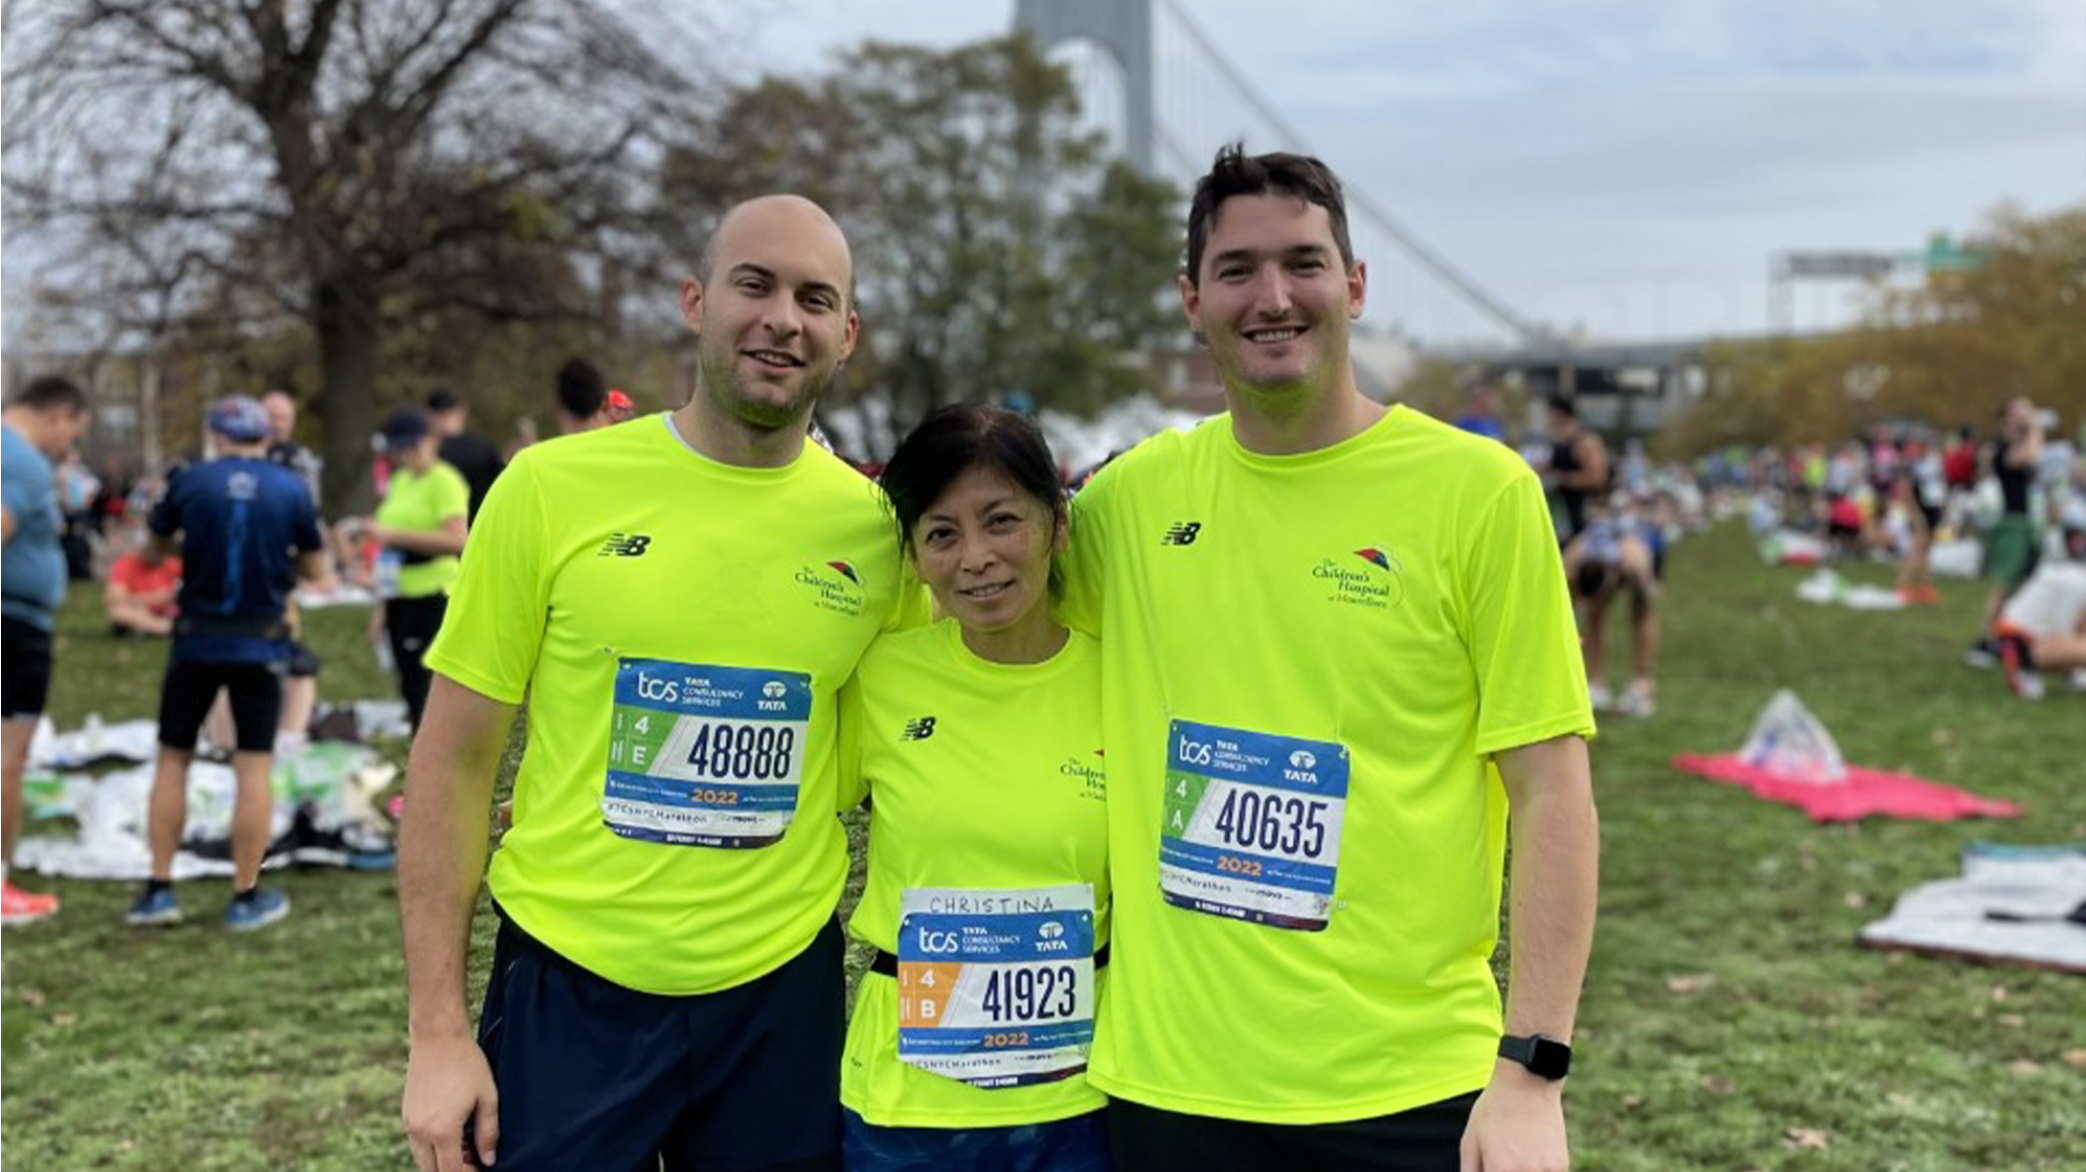 Three runners in neon yellow shirts pose and smile for the camera.